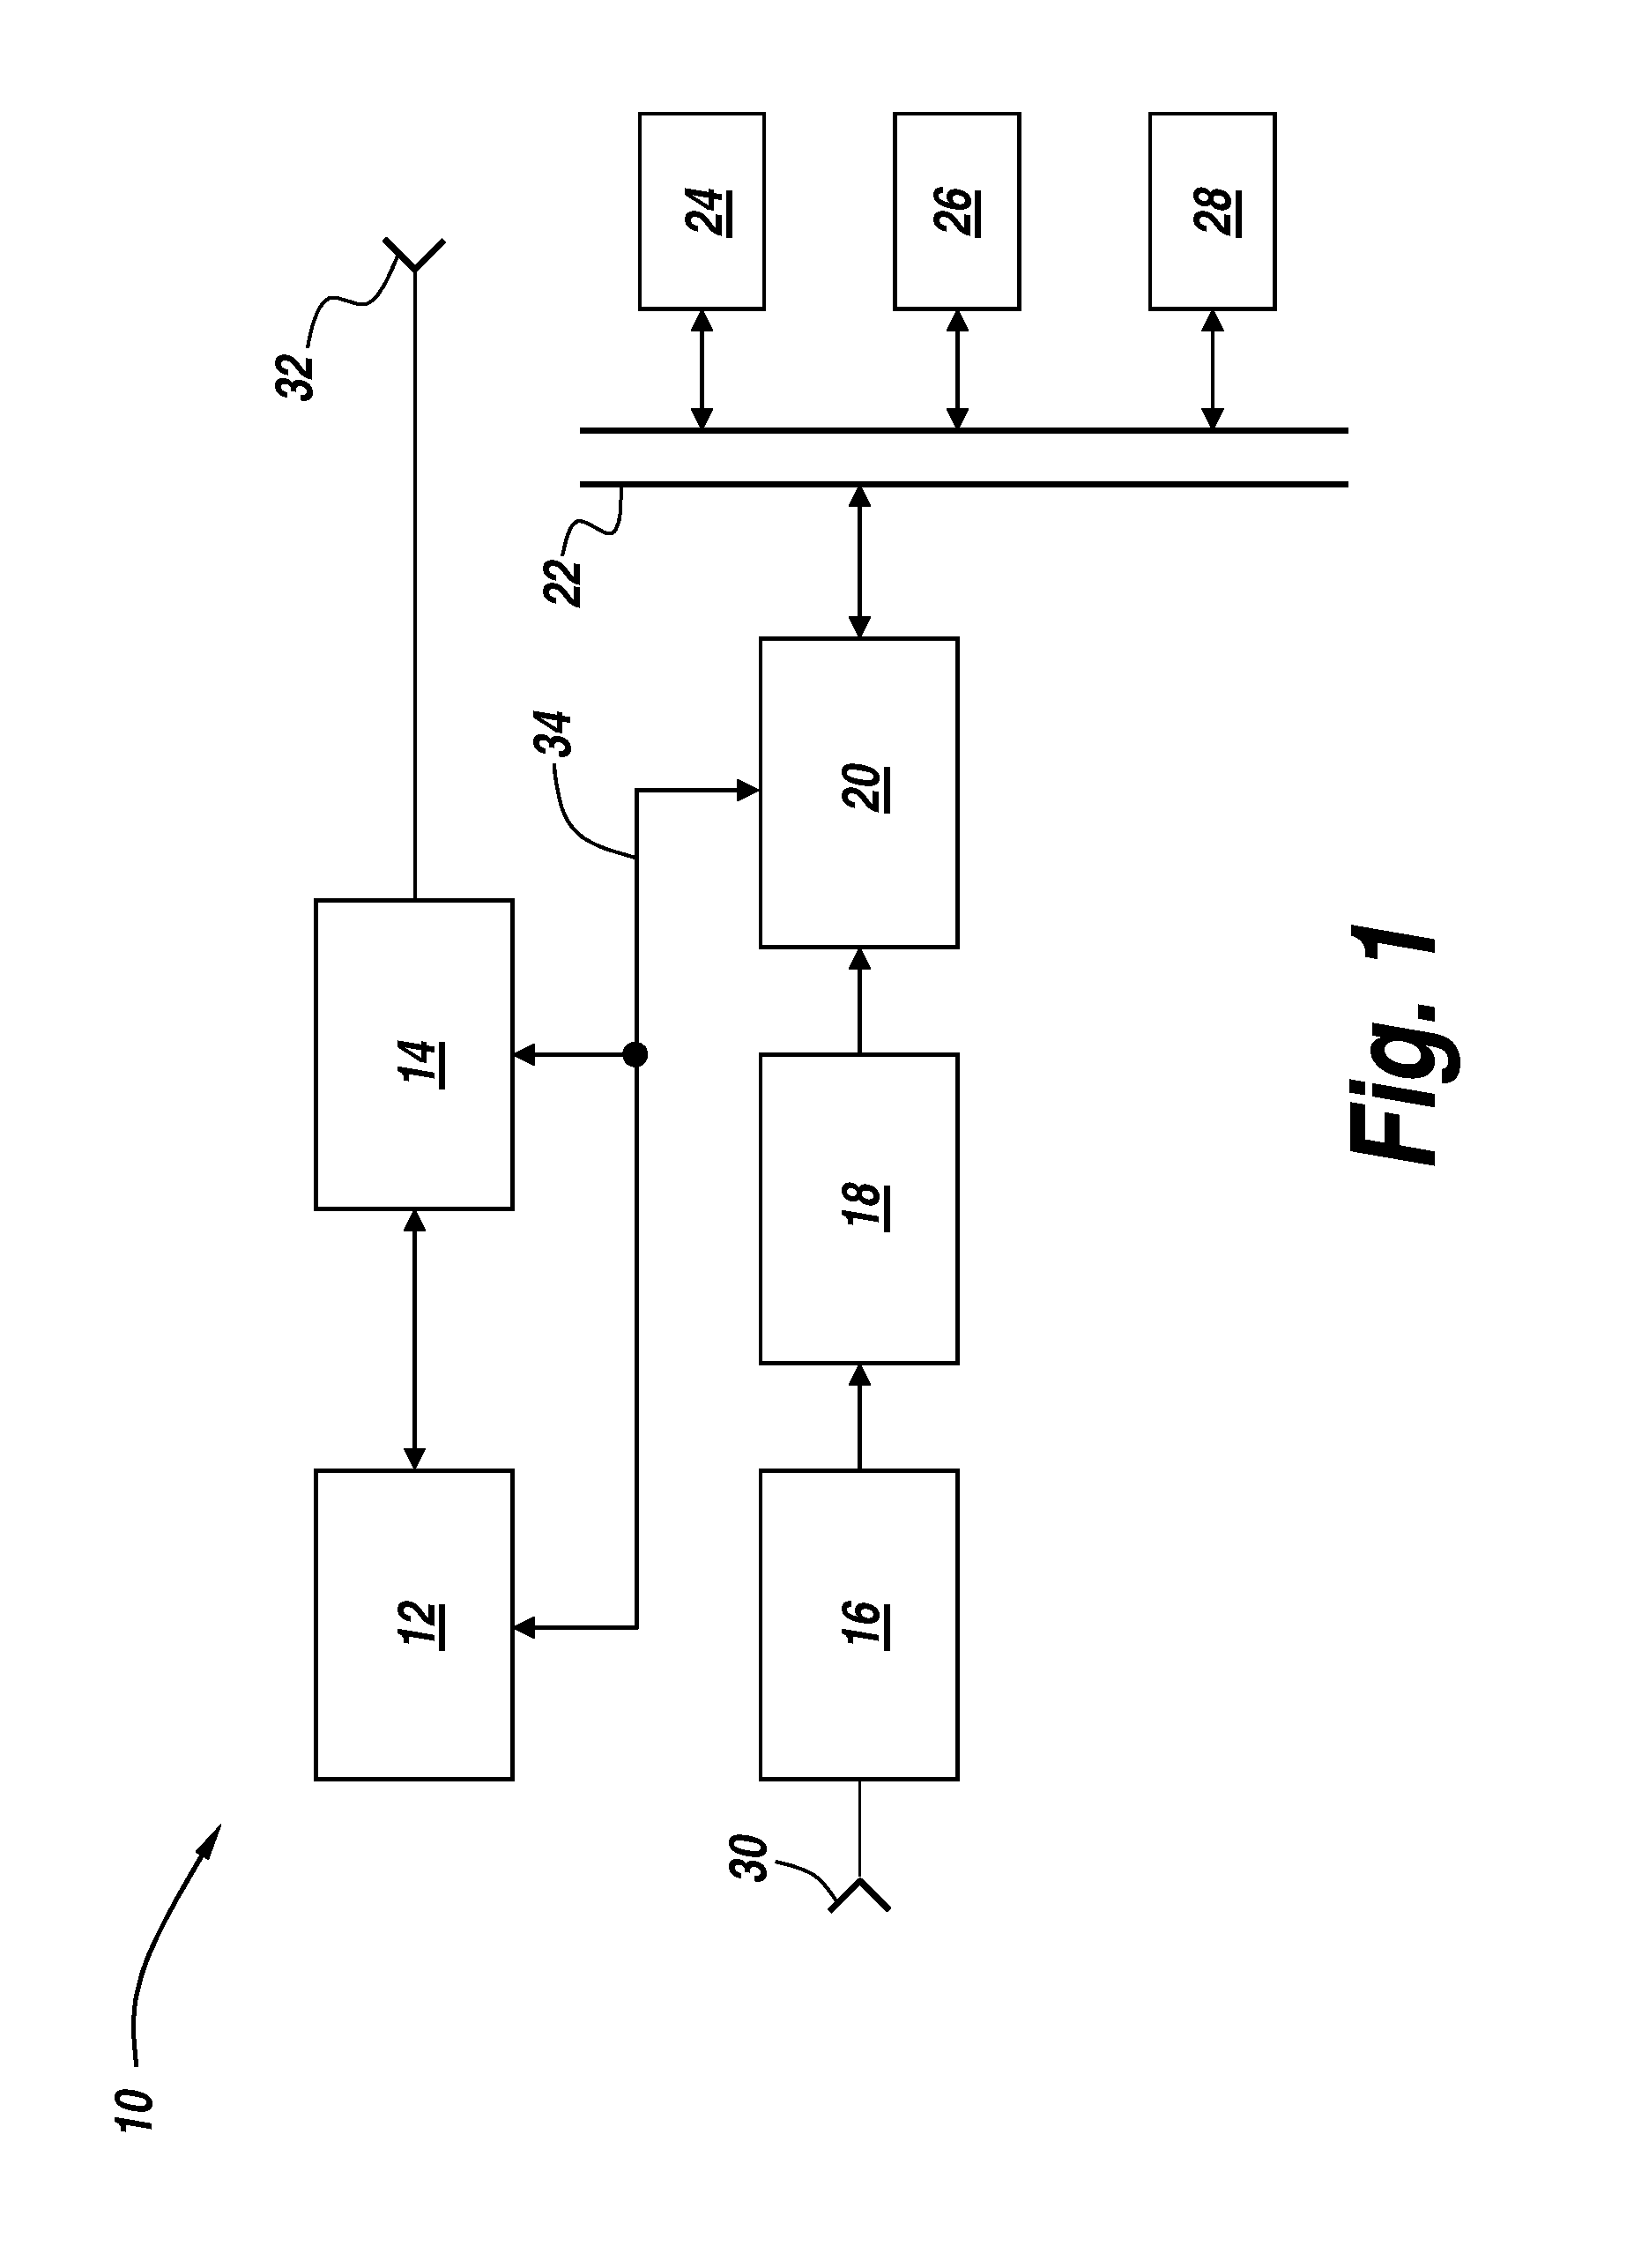 Radar system and method for determining range, relative velocity and bearing of an object using continuous-wave and chirp signals